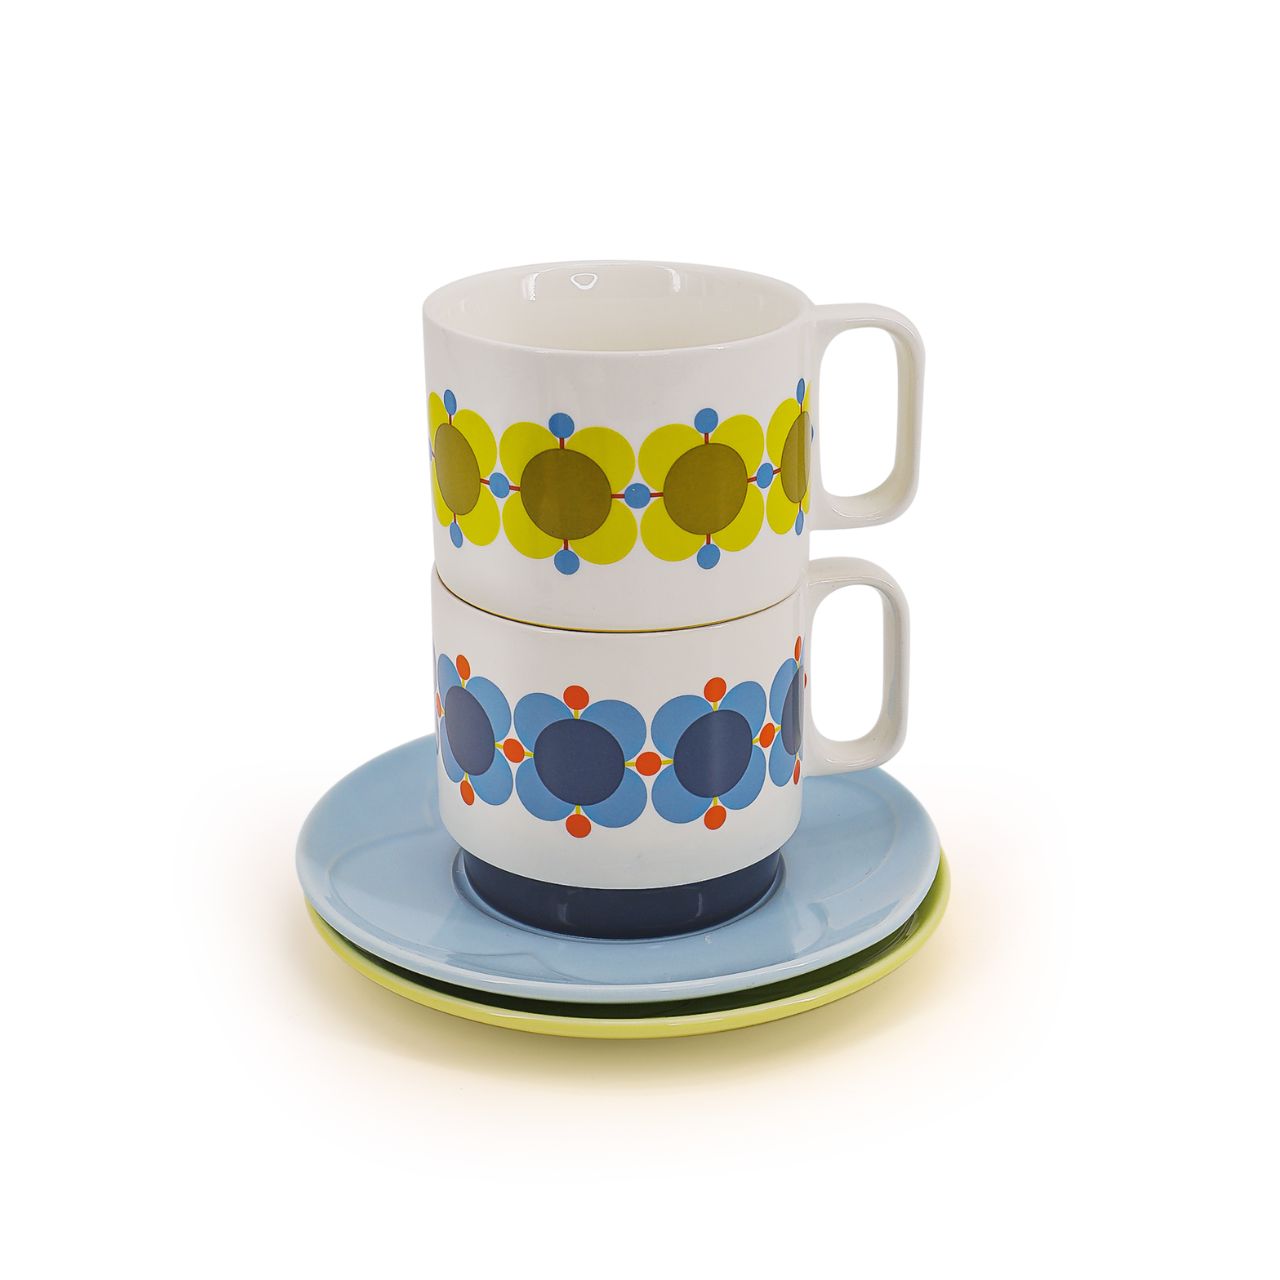 Orla Kiely Set 2 Tea Cup & Saucer - Atomic Flower  DESIGNED IN THE UK BY ORLA KIELY: This set of two tea cup and saucer has a unique 'Atomic Flower' print.  Each cup is stamped with an authentic Orla Kiely logo.